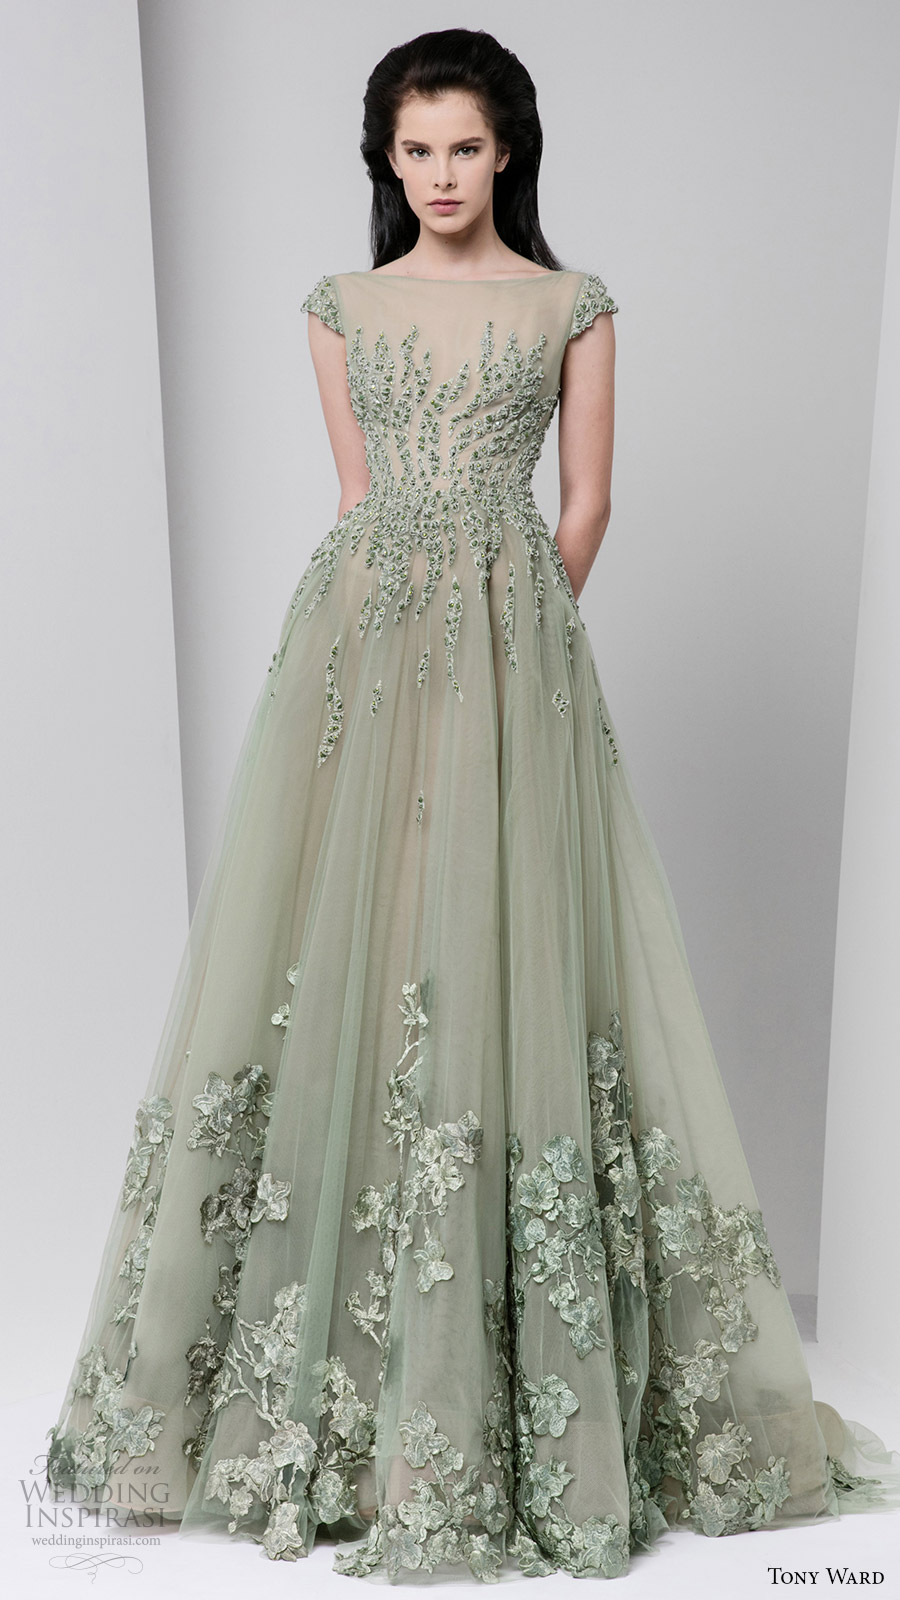 Gown dresses to make a woman look like a princess